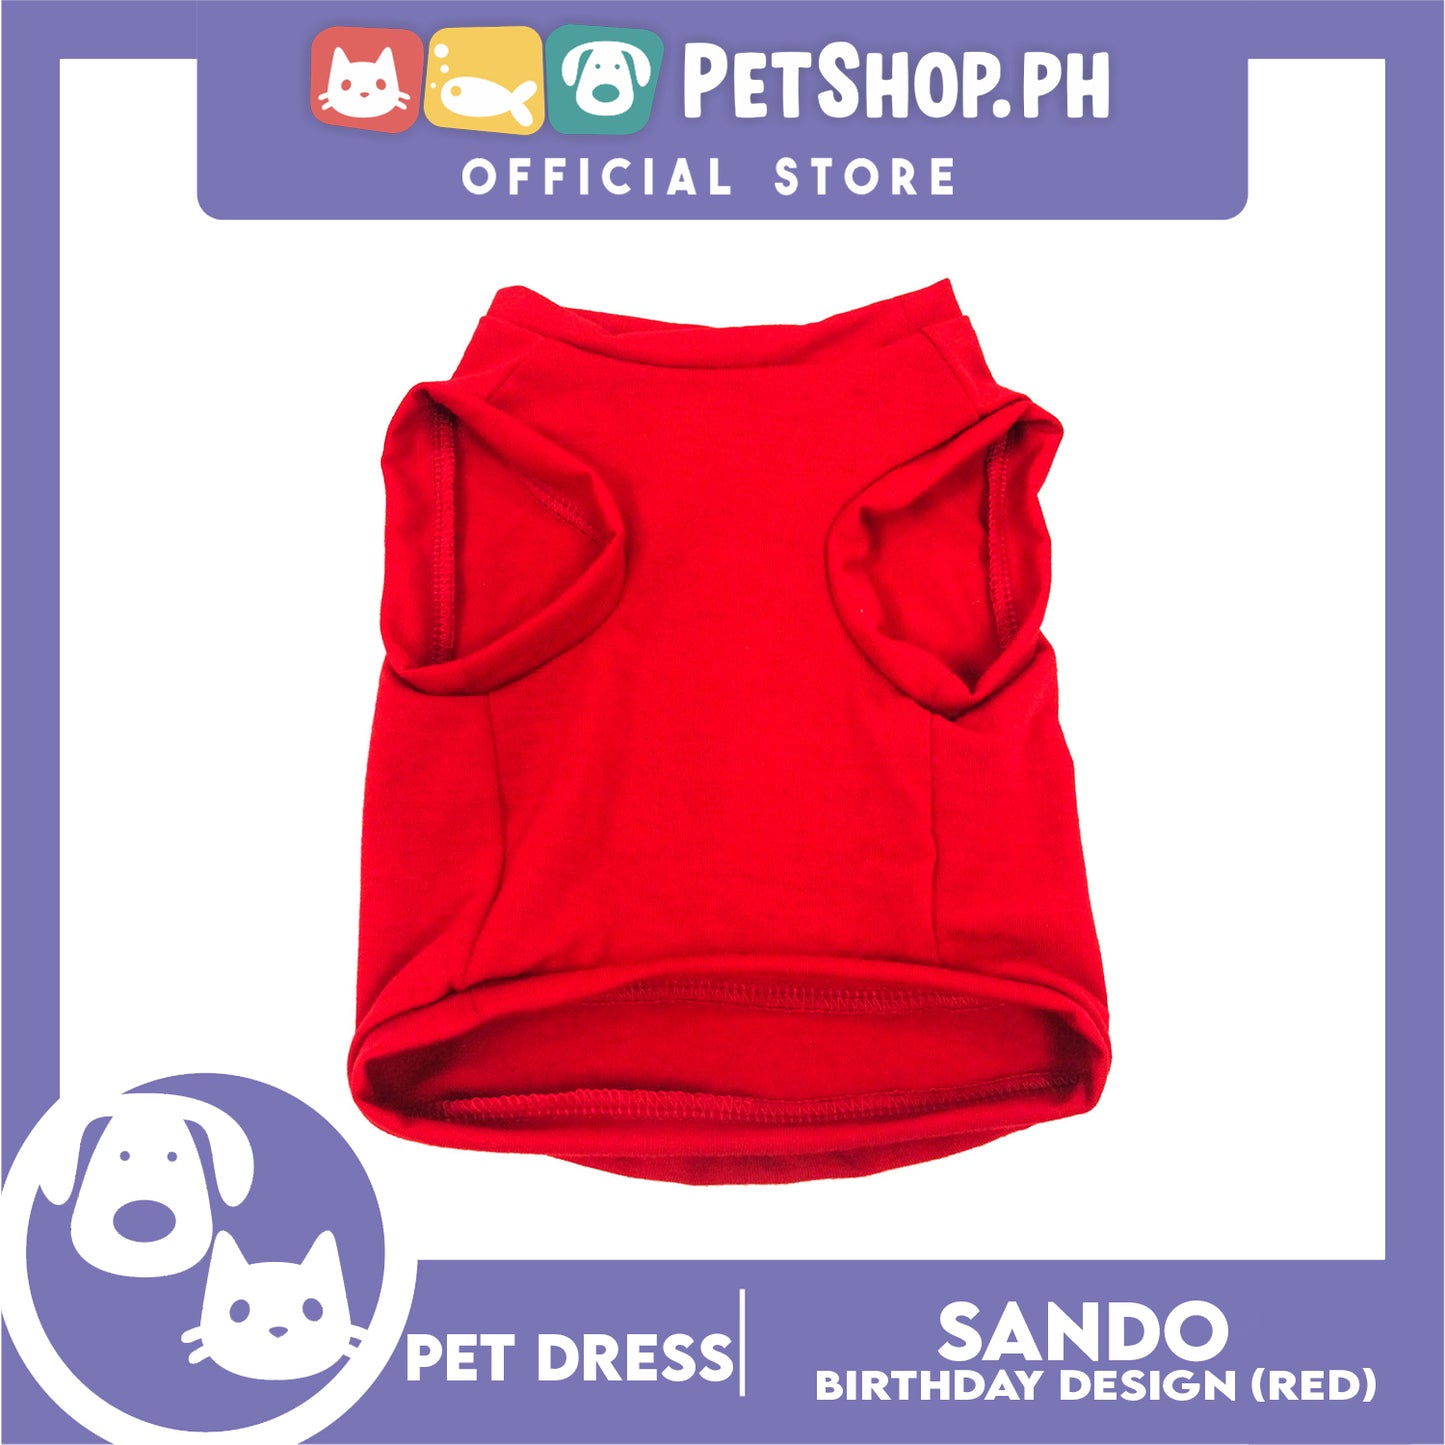 Pet Shirt Sleeveless (Large)  with It's My Birthday at Back for Puppy, Small Dog, & Cat- Sando Breathable Clothes, Pet T-shirt, Dog Sando